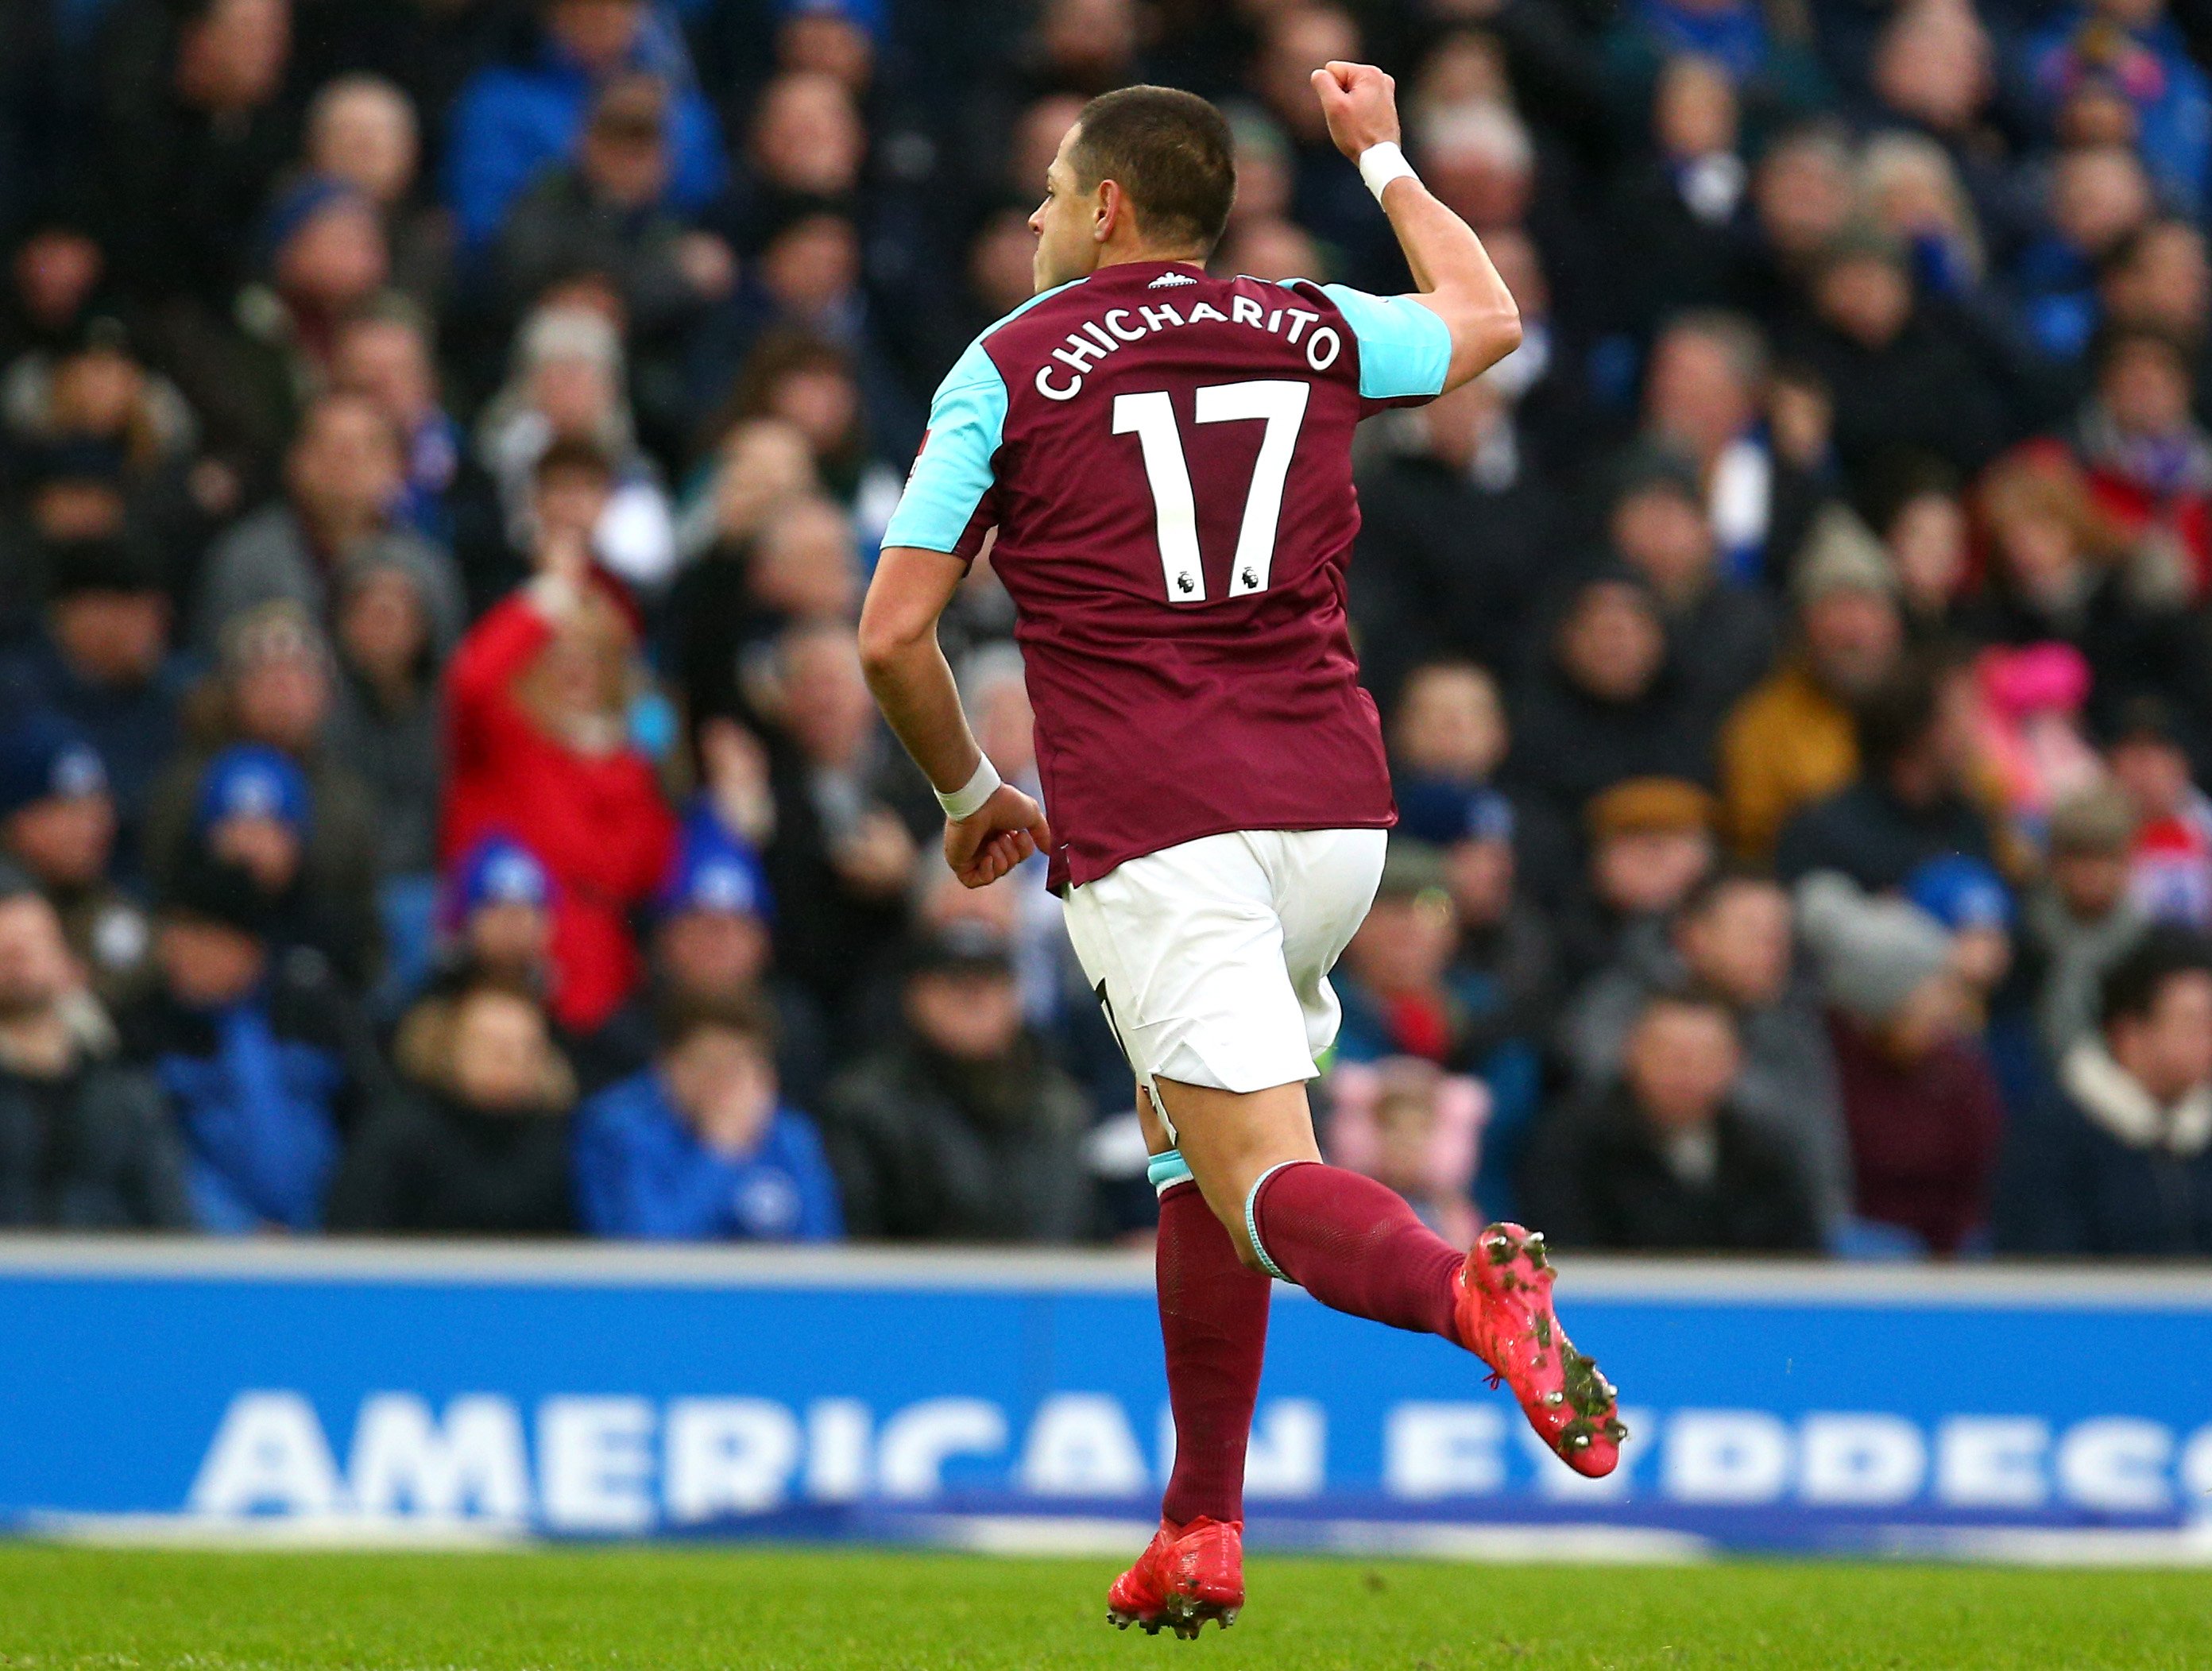 What number will Javier 'Chicharito' Hernandez have at West Ham